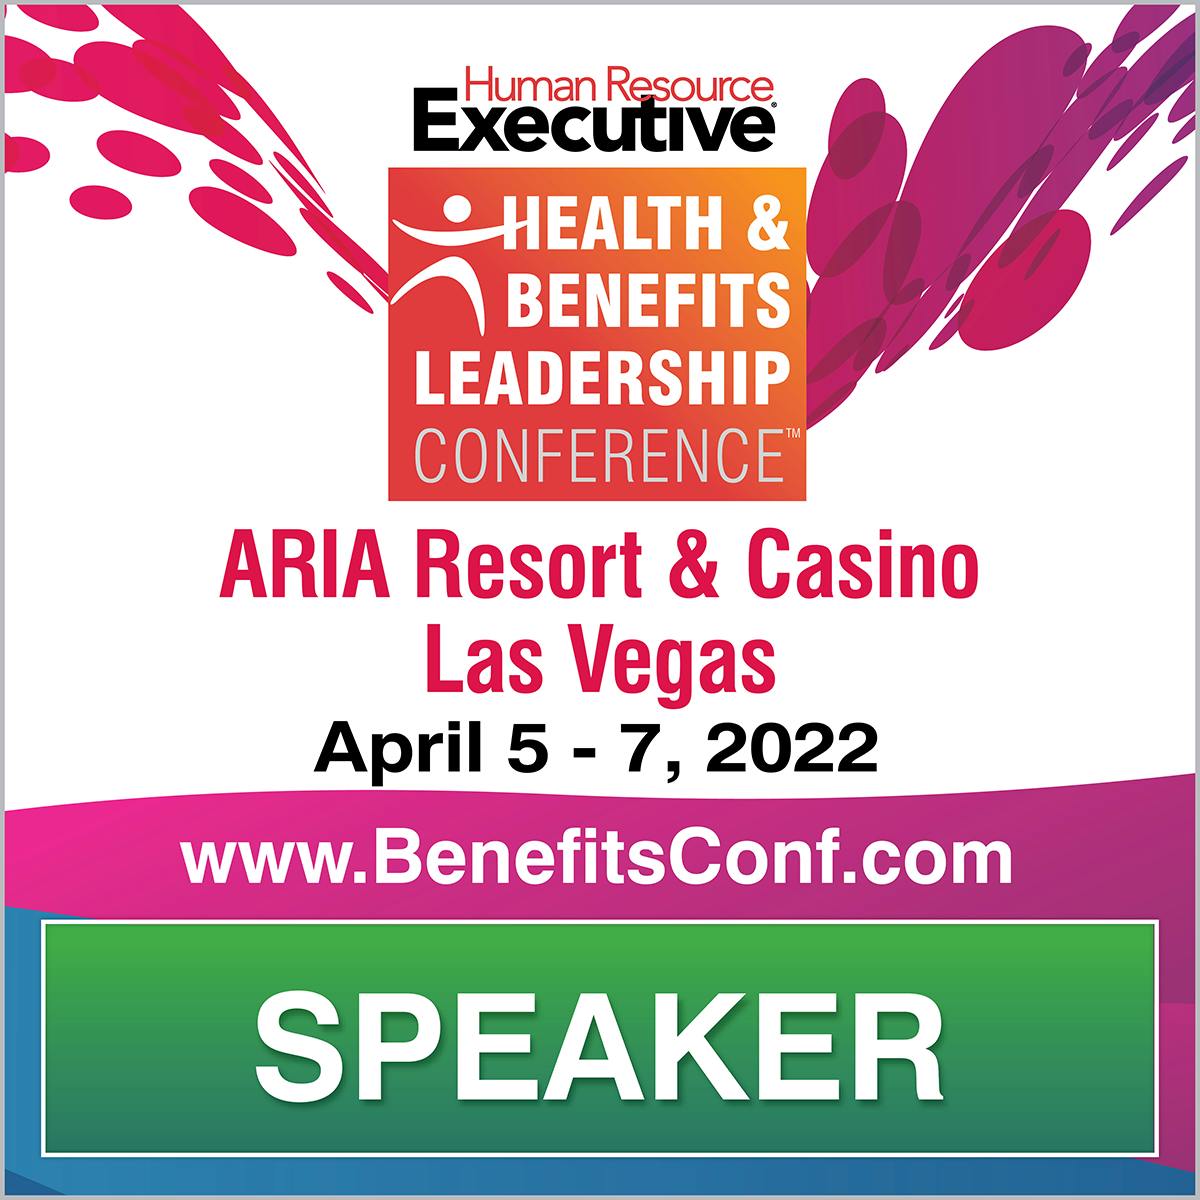 Event: HRE Health & Benefits Leadership Conference